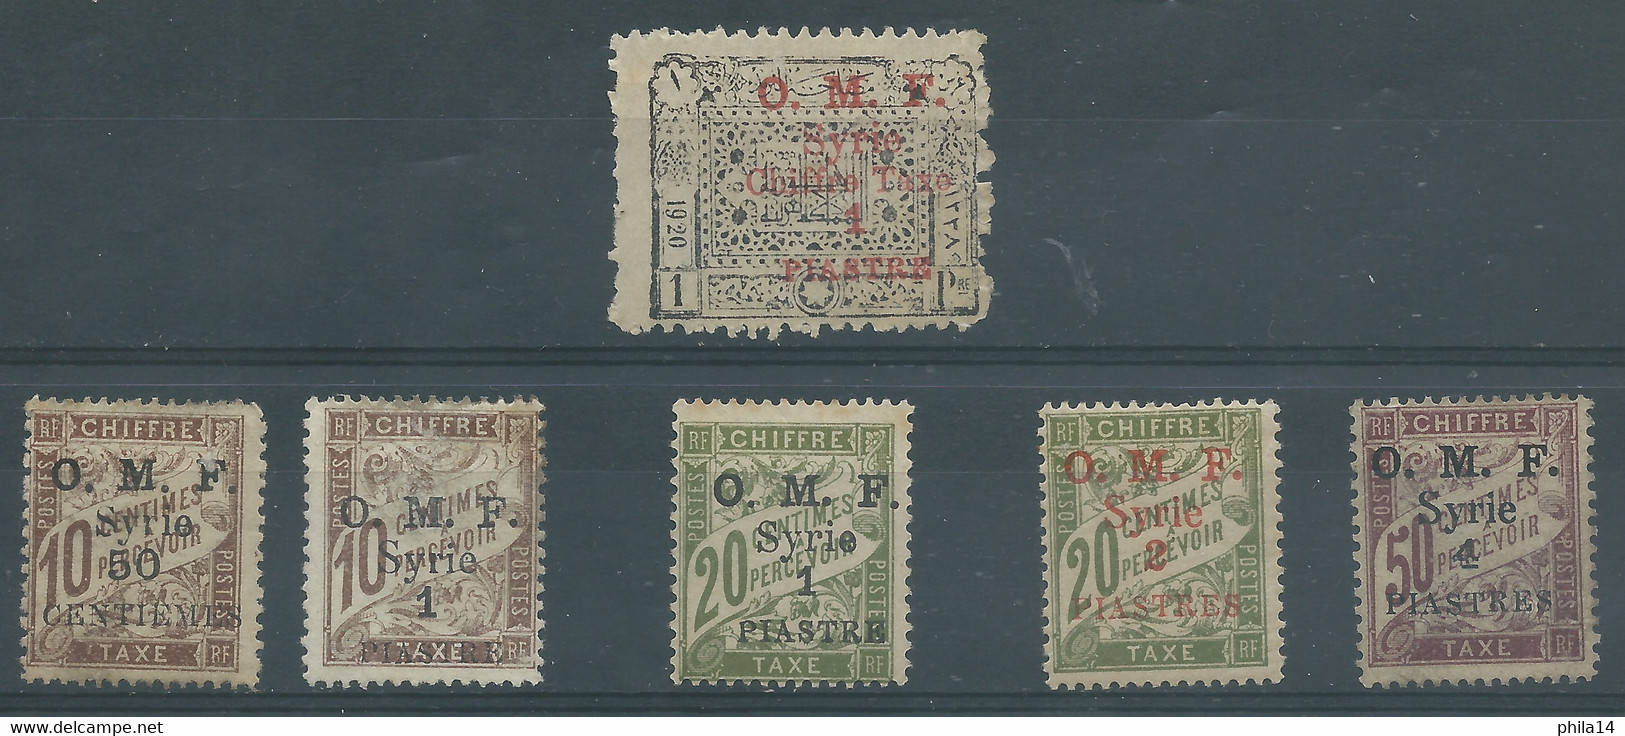 LOT DE 6 TIMBRES TAXE SYRIE OMF / * - Postage Due